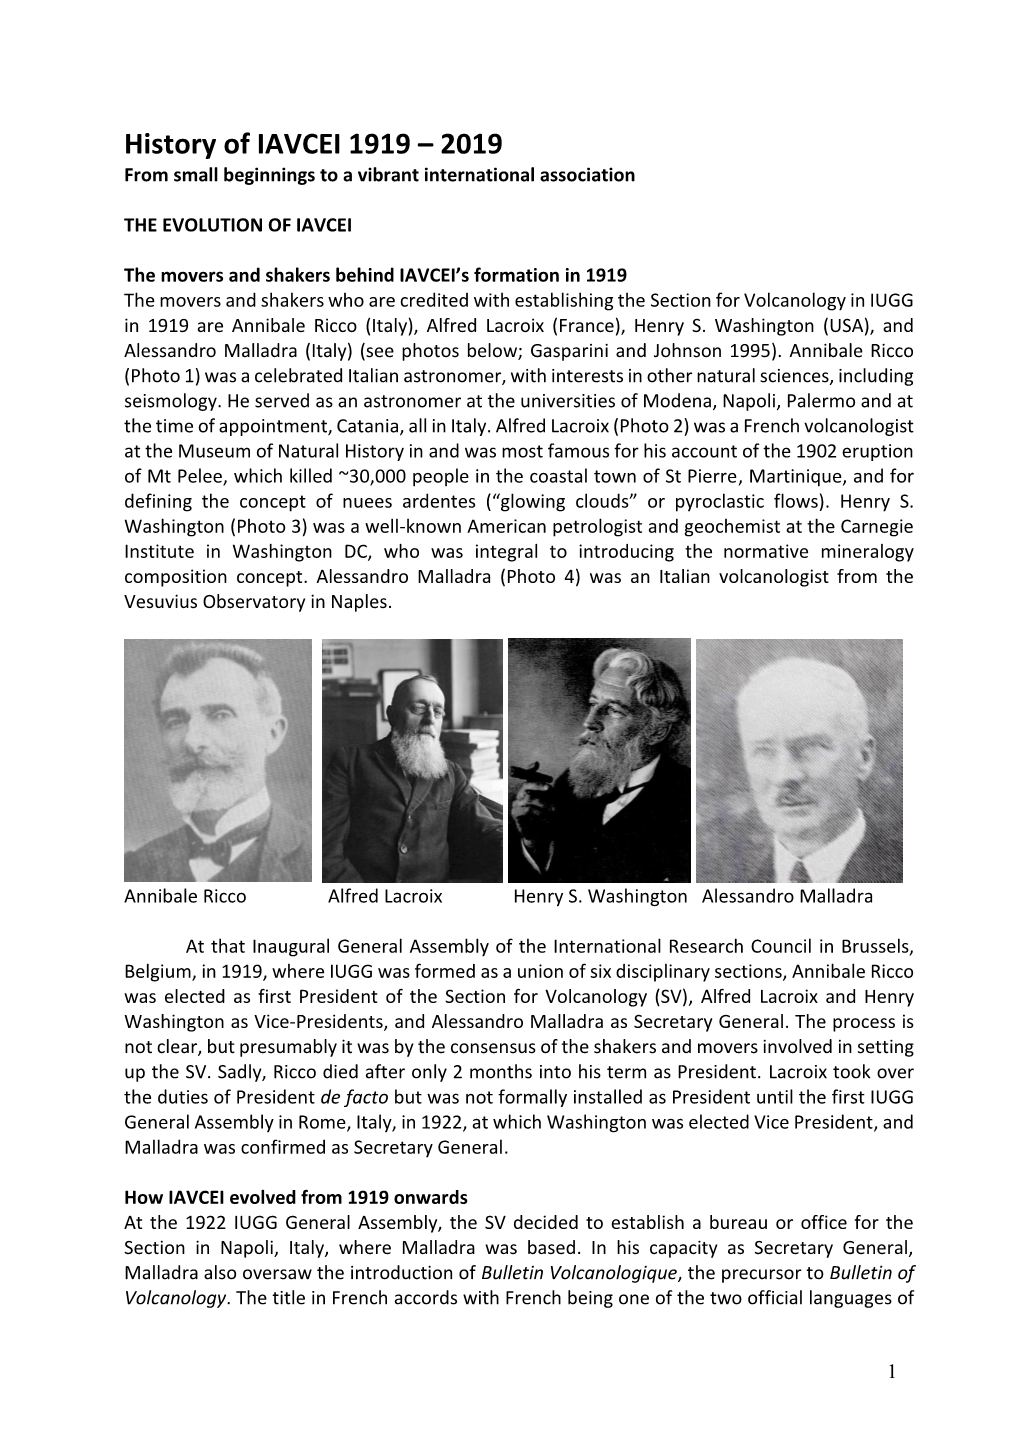 History of IAVCEI 1919 – 2019 from Small Beginnings to a Vibrant International Association